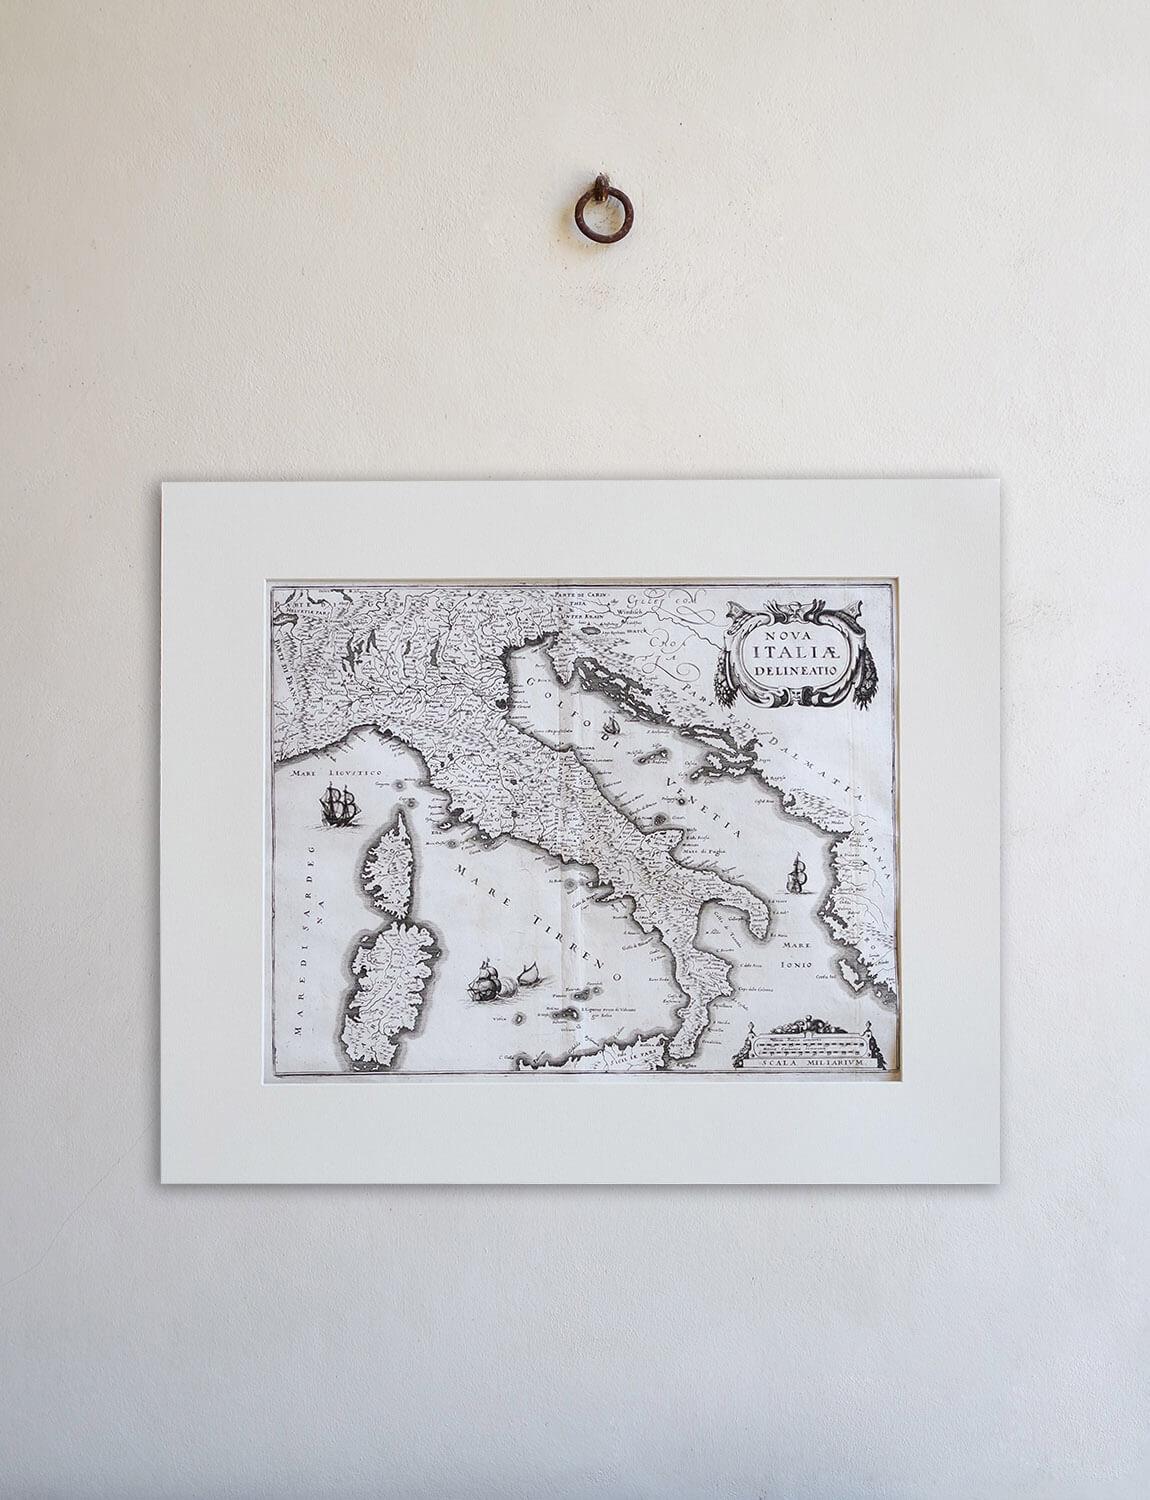 This beautifully detailed geographical map of Italy was printed in 1640. It was made by the expert Swiss engraver Matthaus Merian the Elder (1593-1650). Its high quality uniform inking is set on hand-made paper also made in the early 17th century